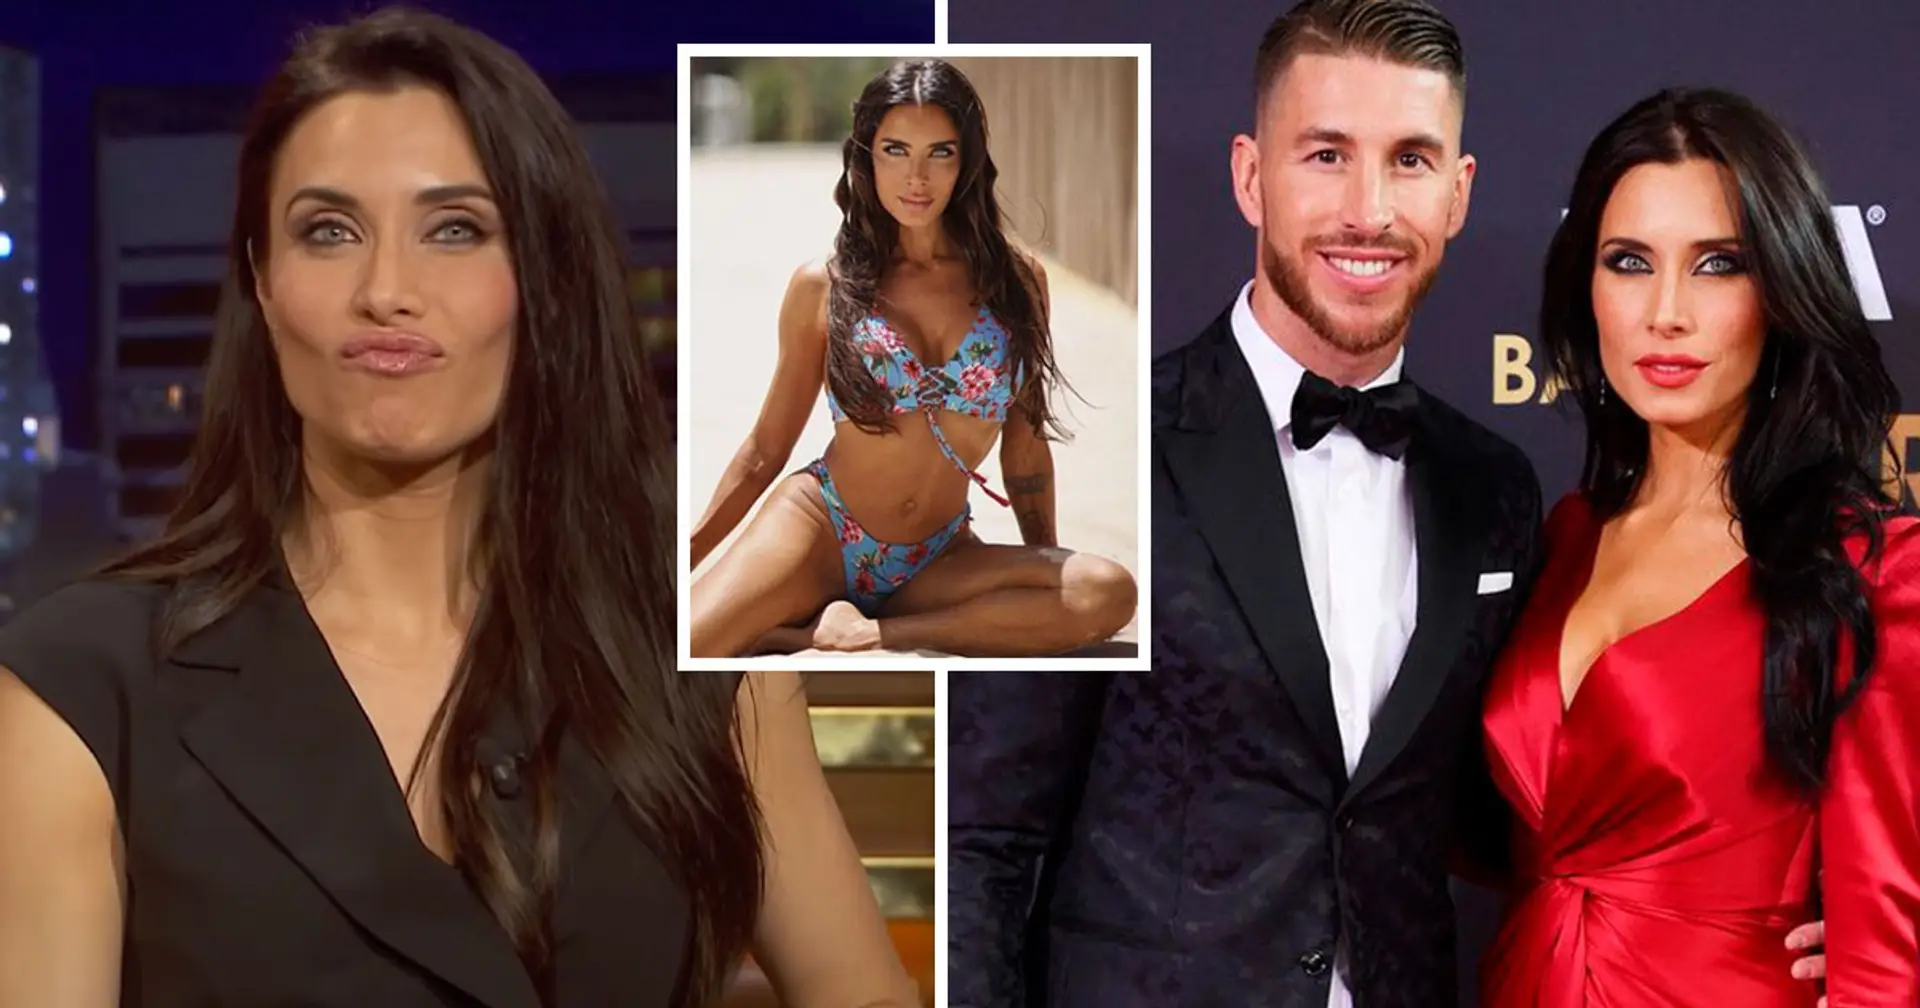 My children are in bed at 9.30pm. Sex is life': Pilar Rubio she has sex with her husband Sergio Ramos every day - Football | Tribuna.com